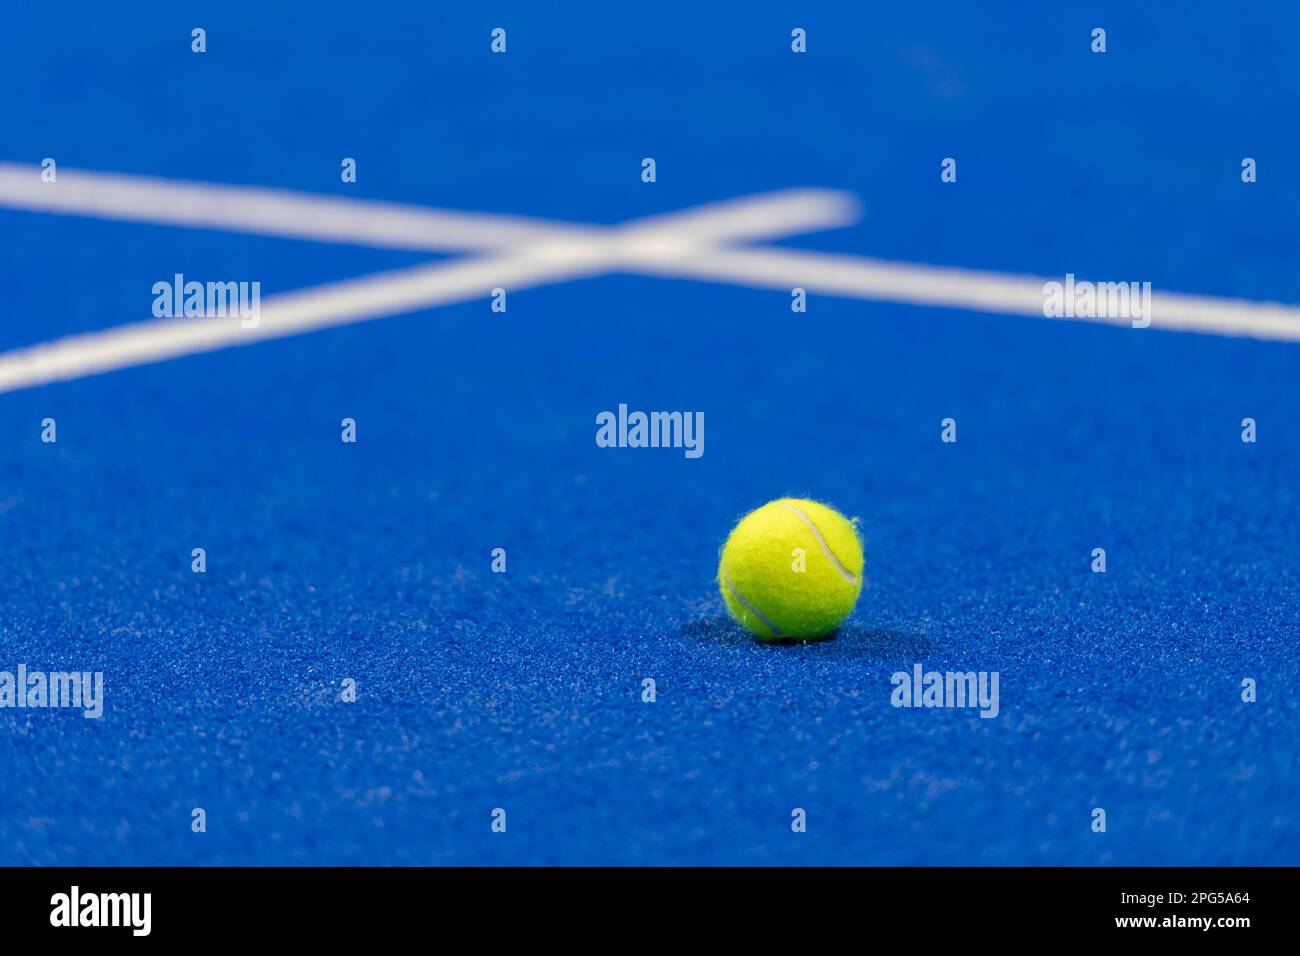 Yellow tennis ball in court on blue turf. Horizontal sport poster, greeting cards, headers, website Stock Photo